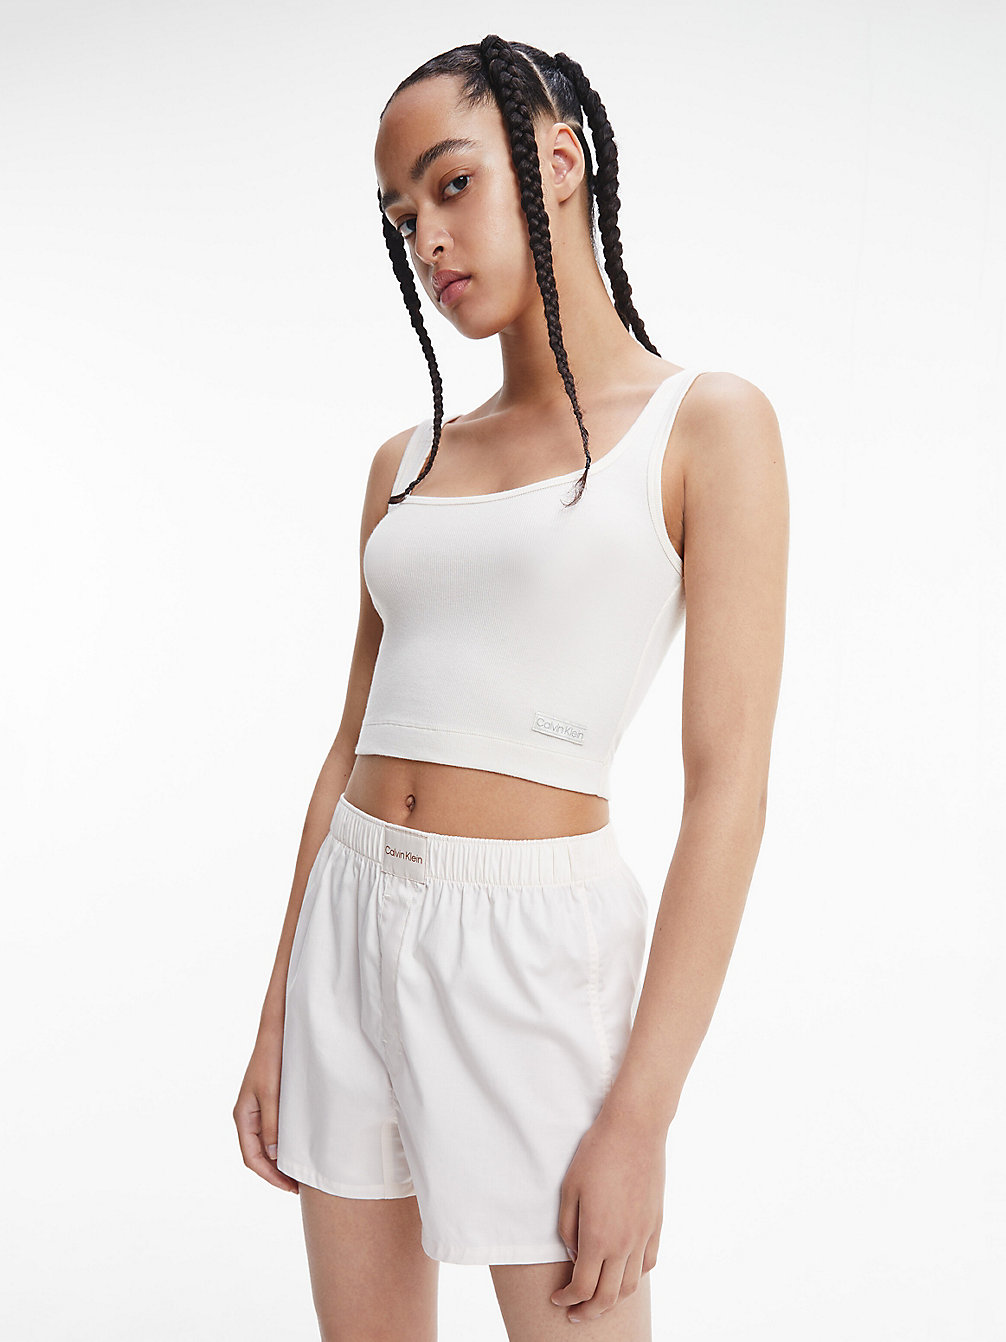 DEW Lounge Tank Top - Pure Ribbed undefined women Calvin Klein